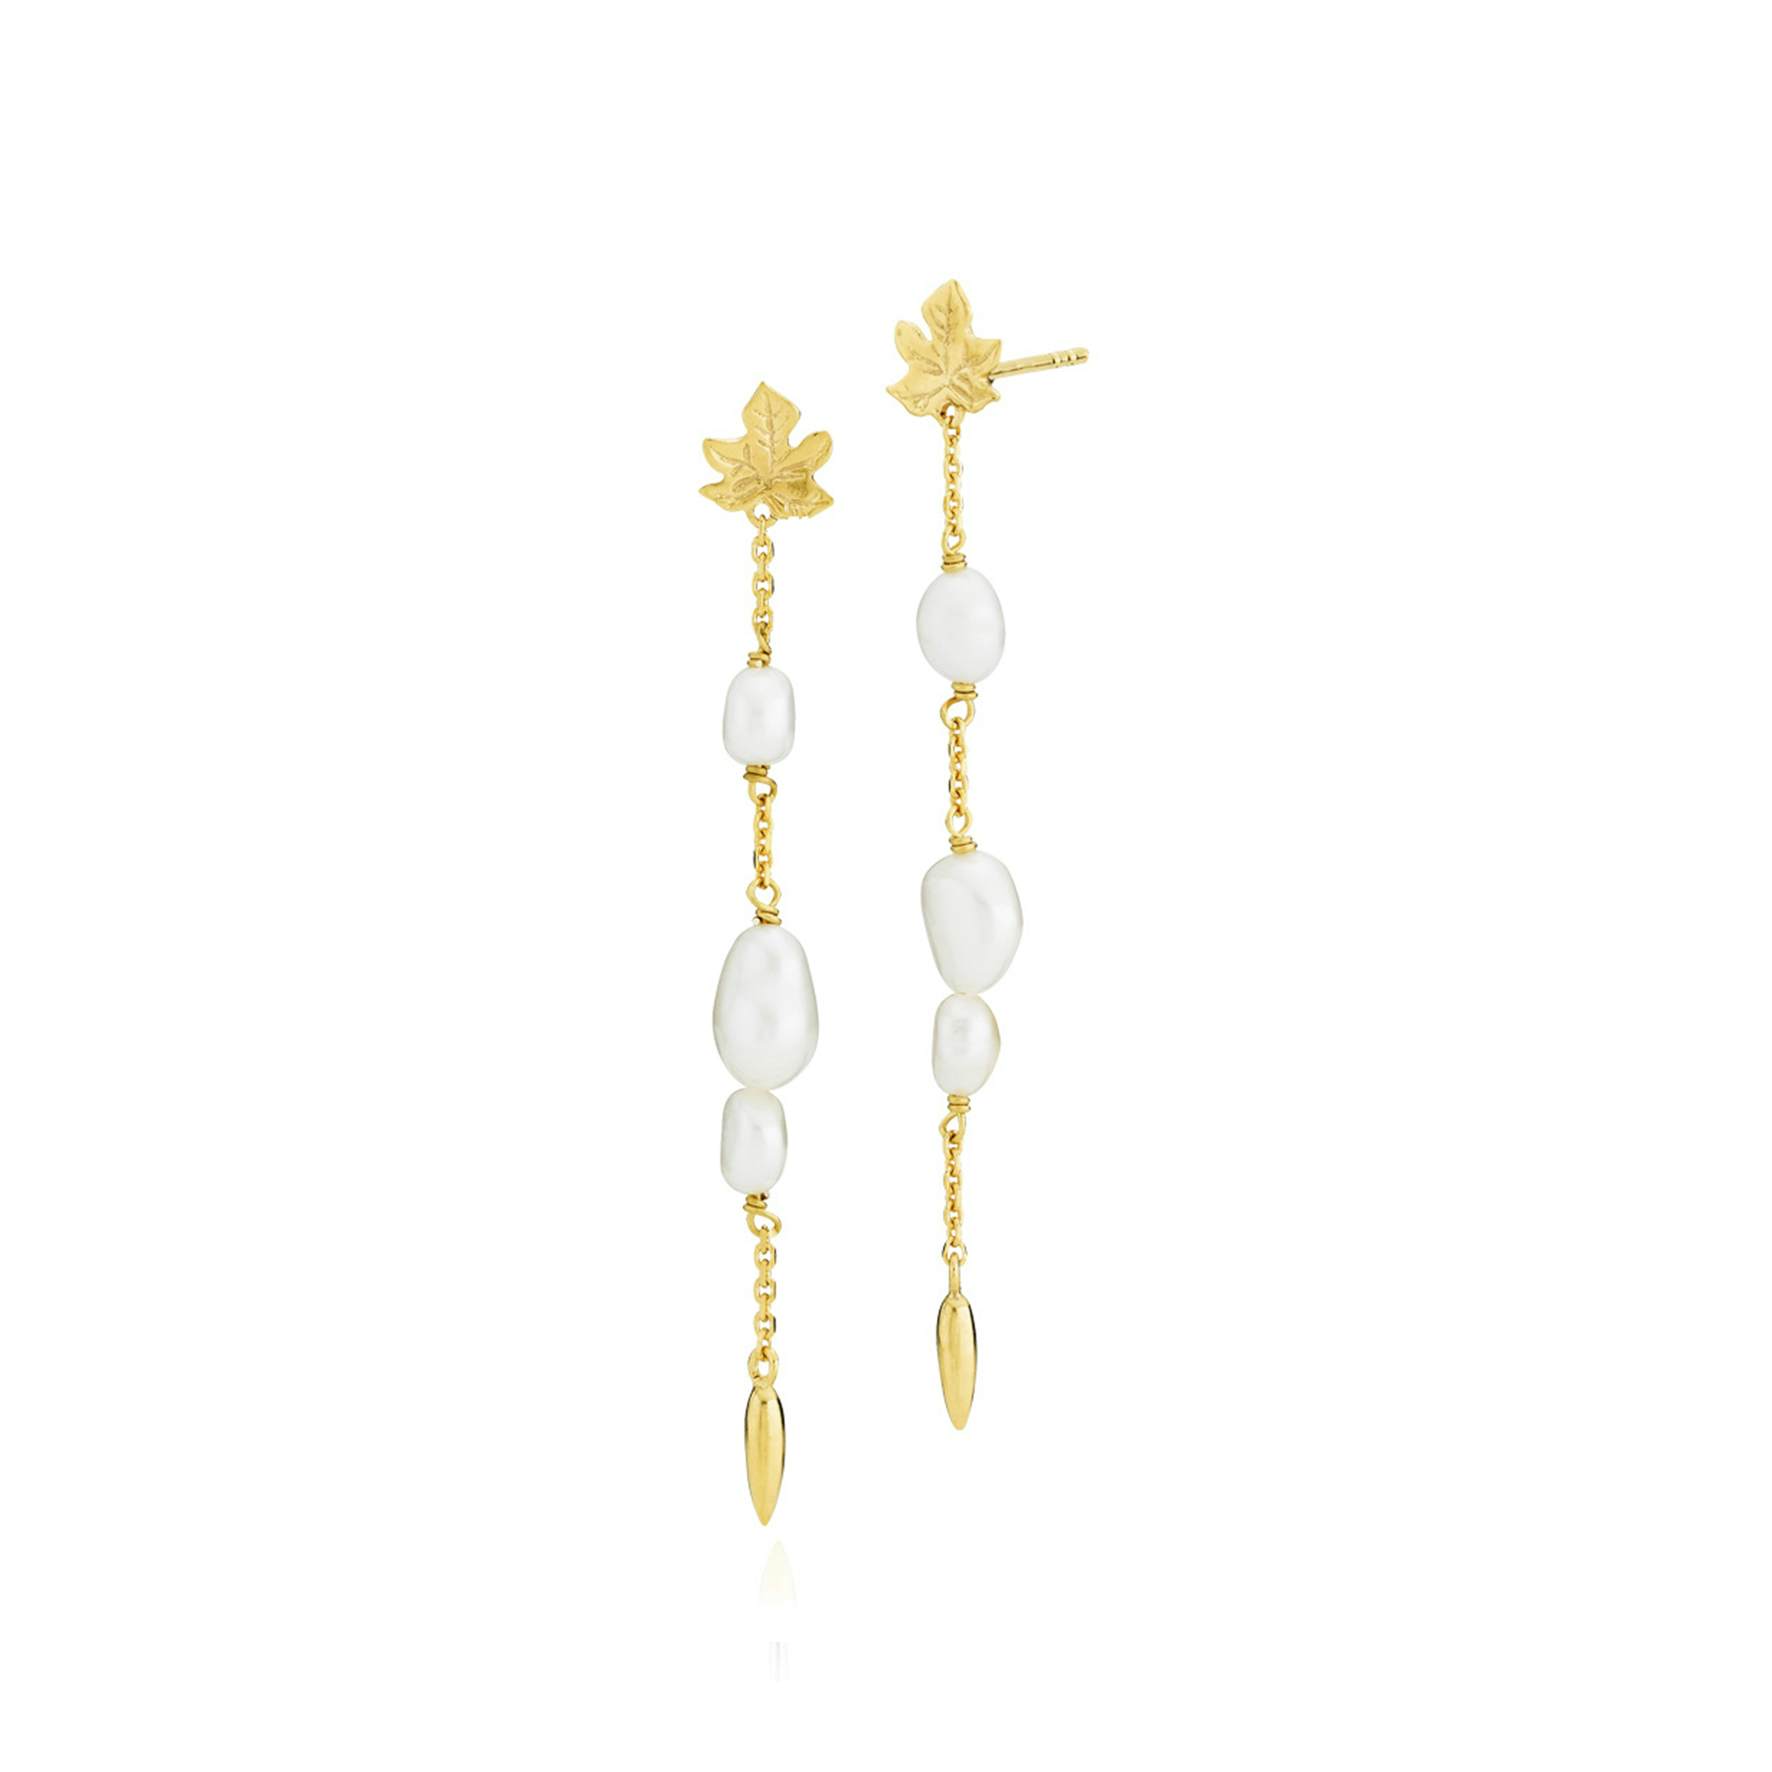 Caley Long Earrings from Izabel Camille in Goldplated-Silver Sterling 925